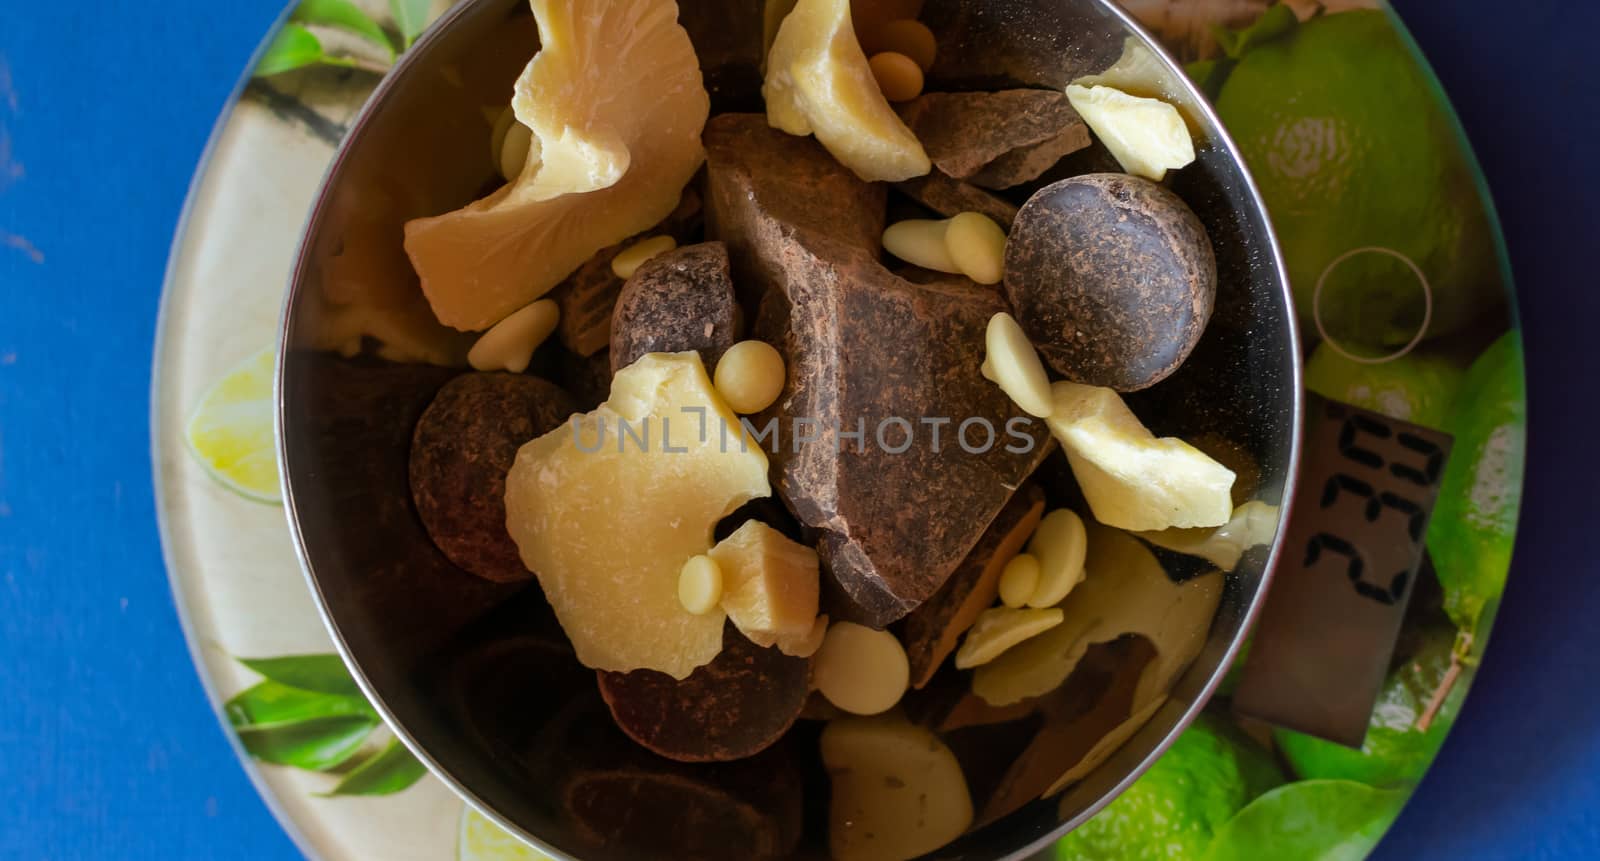 Broken pieces of dark bitter chocolate and white milk chocolate. Ingredients for home cooking of healthy sweets without sugar.